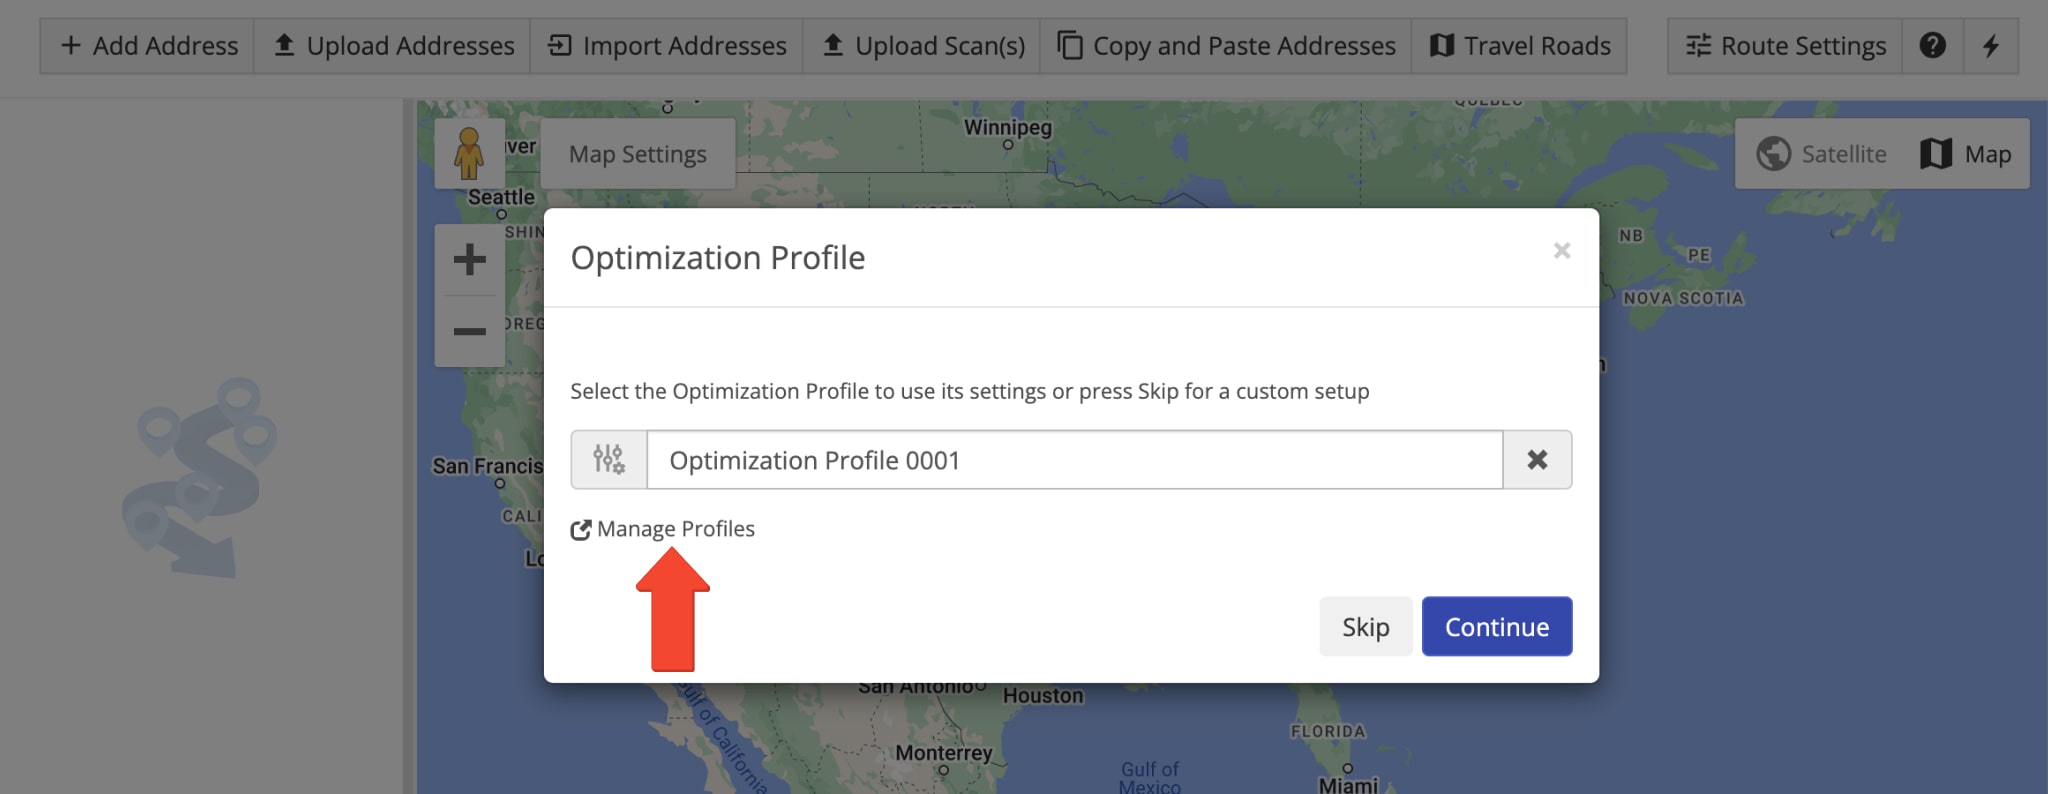 Open Optimization Profiles before adding addresses when planning routes with Service Times.